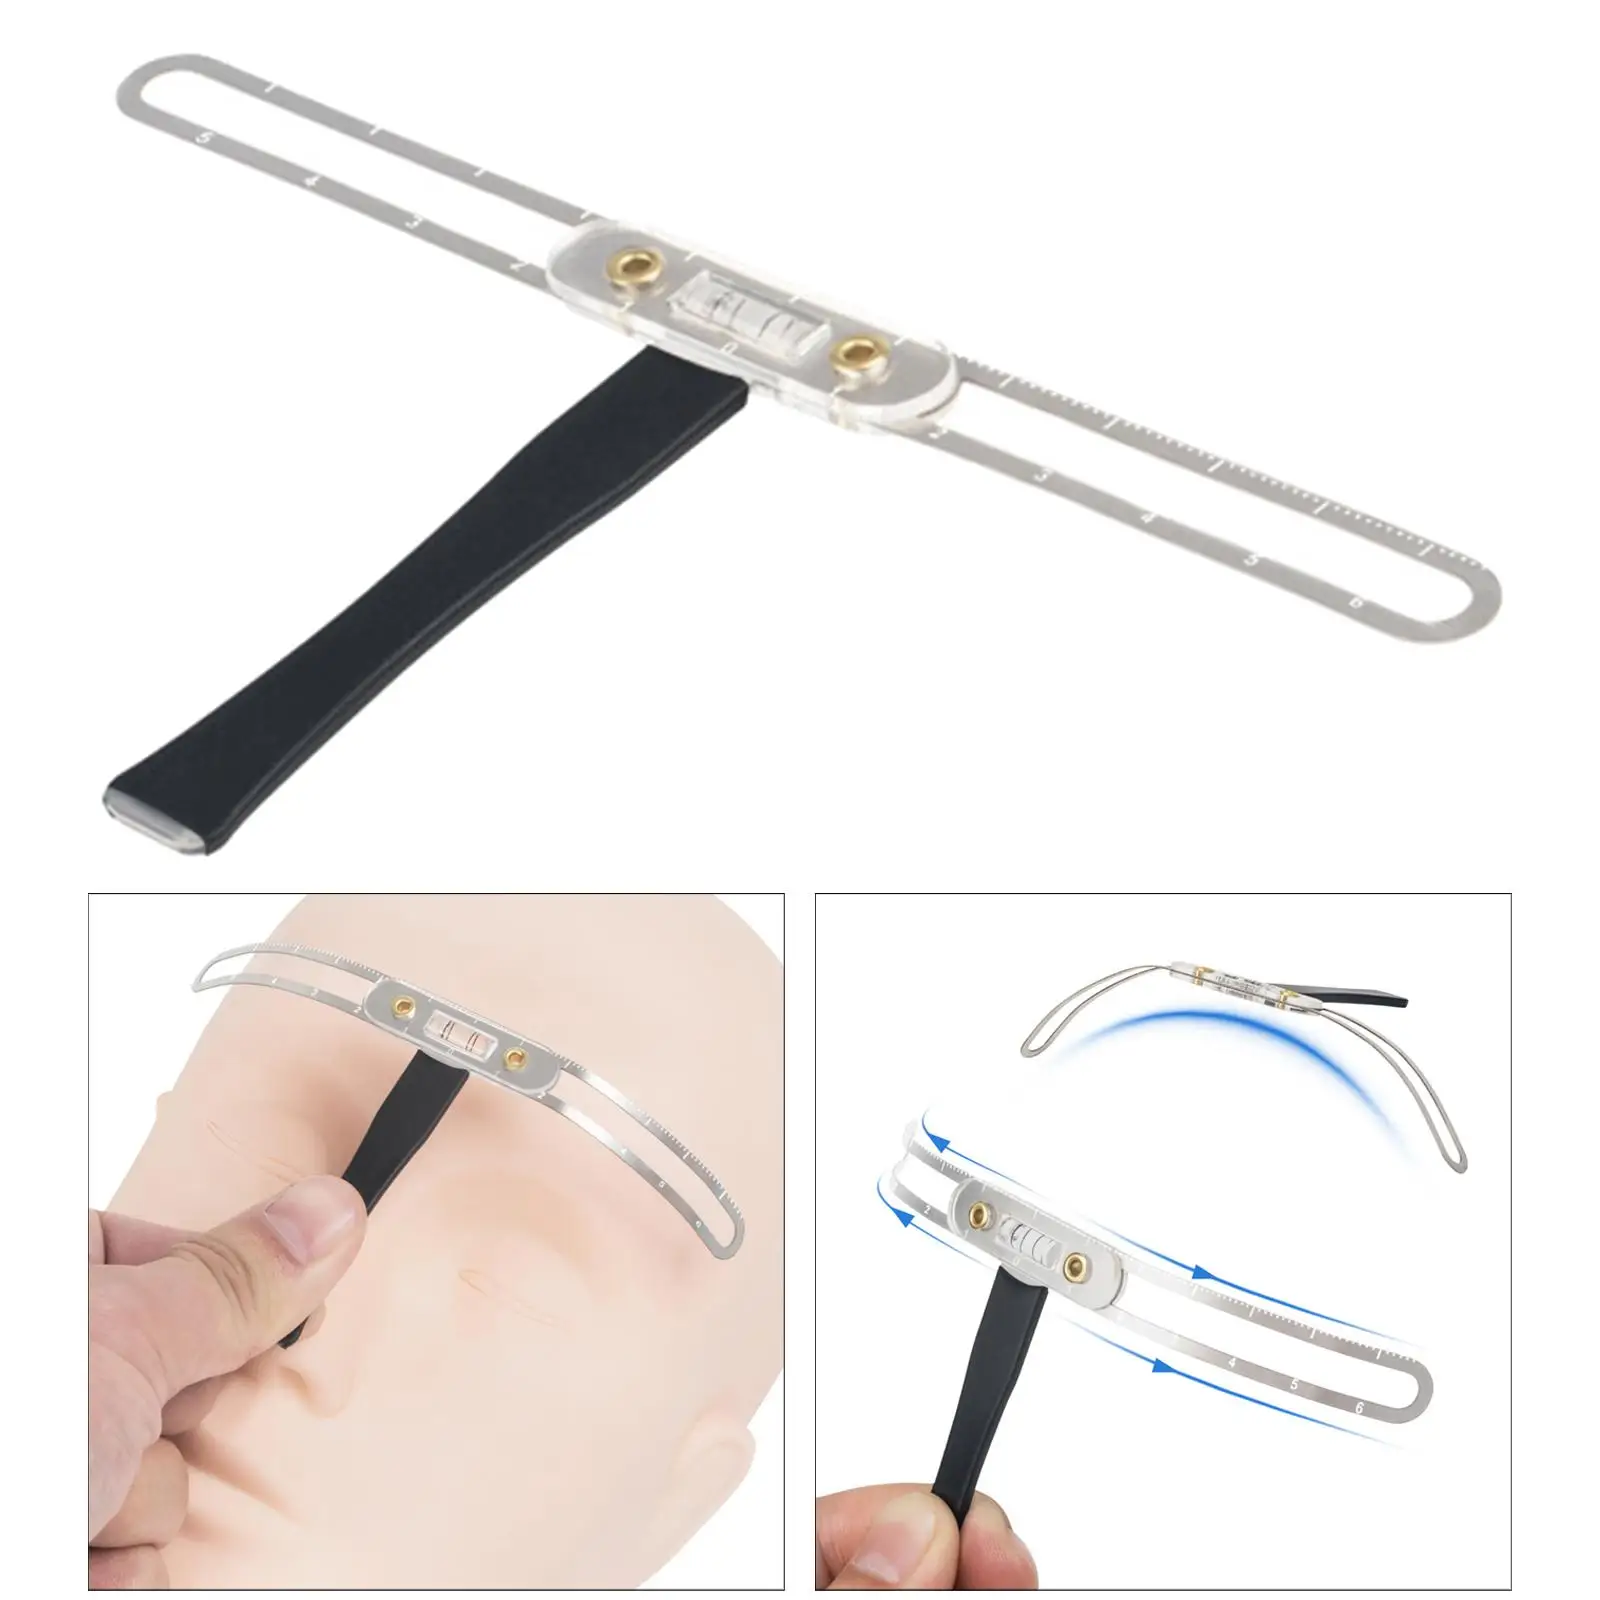 Classic Eyebrow Caliper Measure Ruler Eyebrow Extension Grooming Stencil Shaper Makeup Supplies  Tool  Positioning Shaping